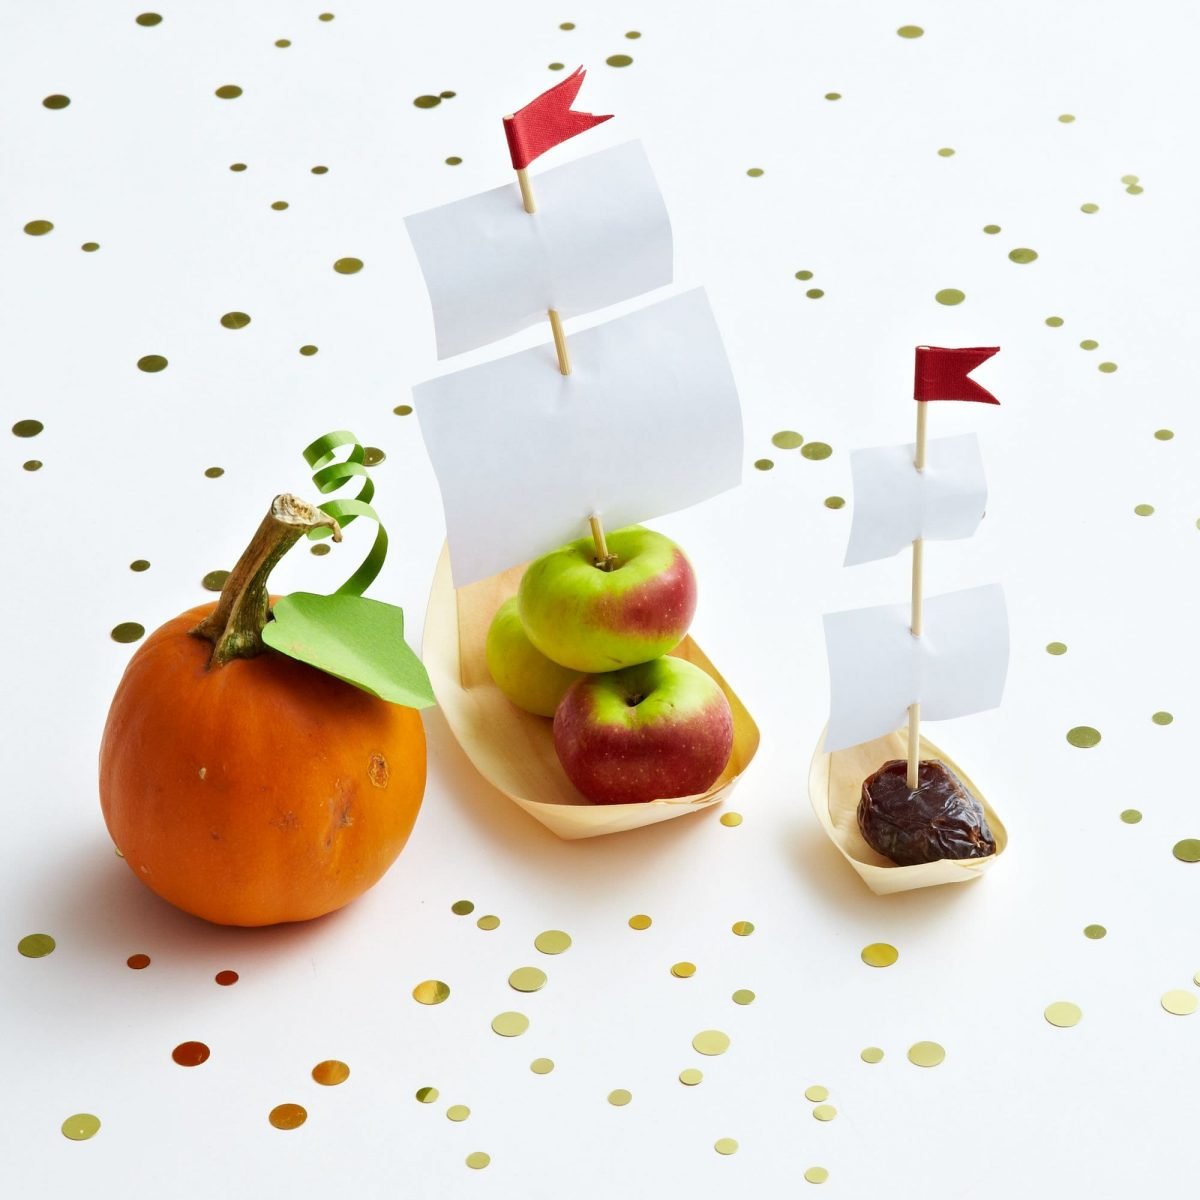 Darcy Miller Designs Apple Sailboats Thanksgiving, Kids Table, Paper Craft, Mayflower, Healthy Snacks, Apple Craft, Crab Apples, Downloadable Template